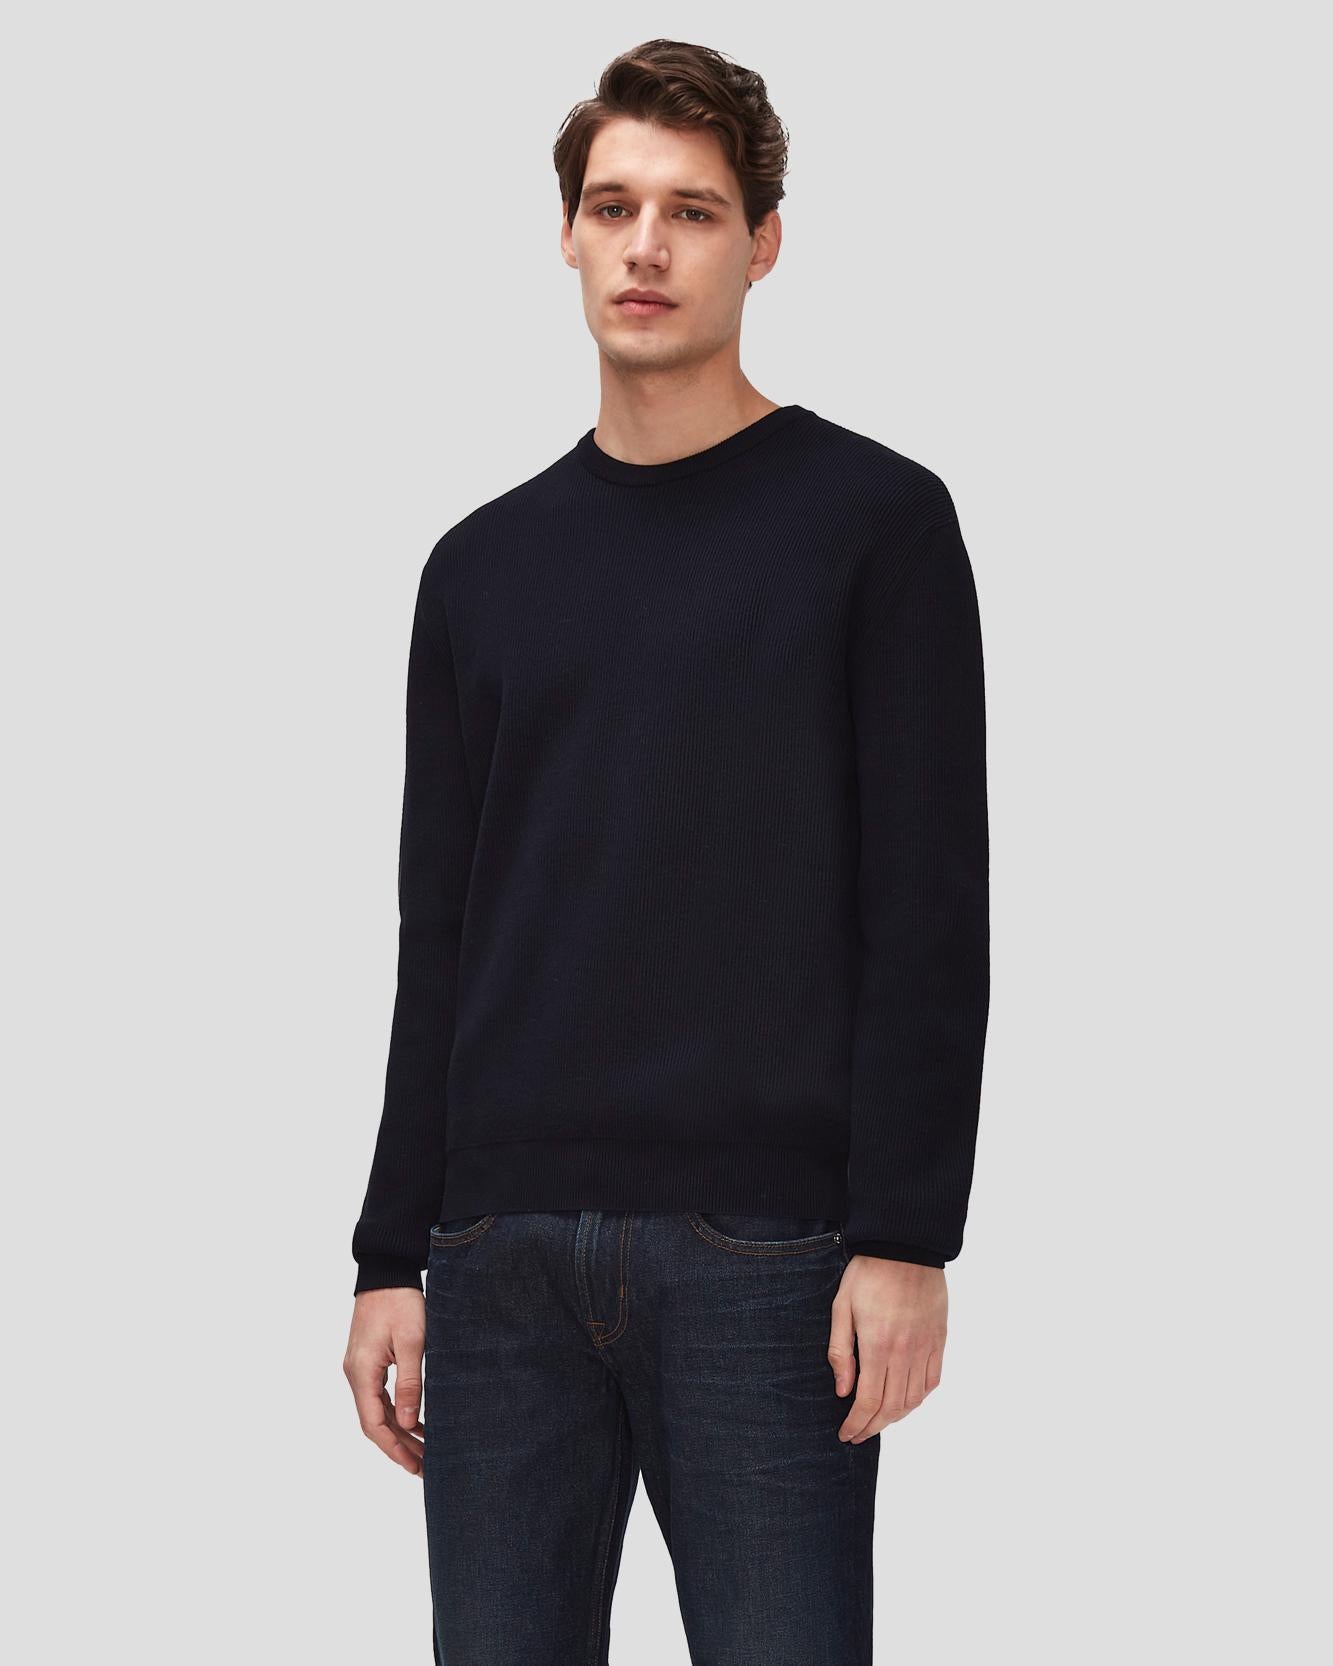 7 For All Mankind Luxe Performance Plus Sweater in Navy 7MSHMH14NVY